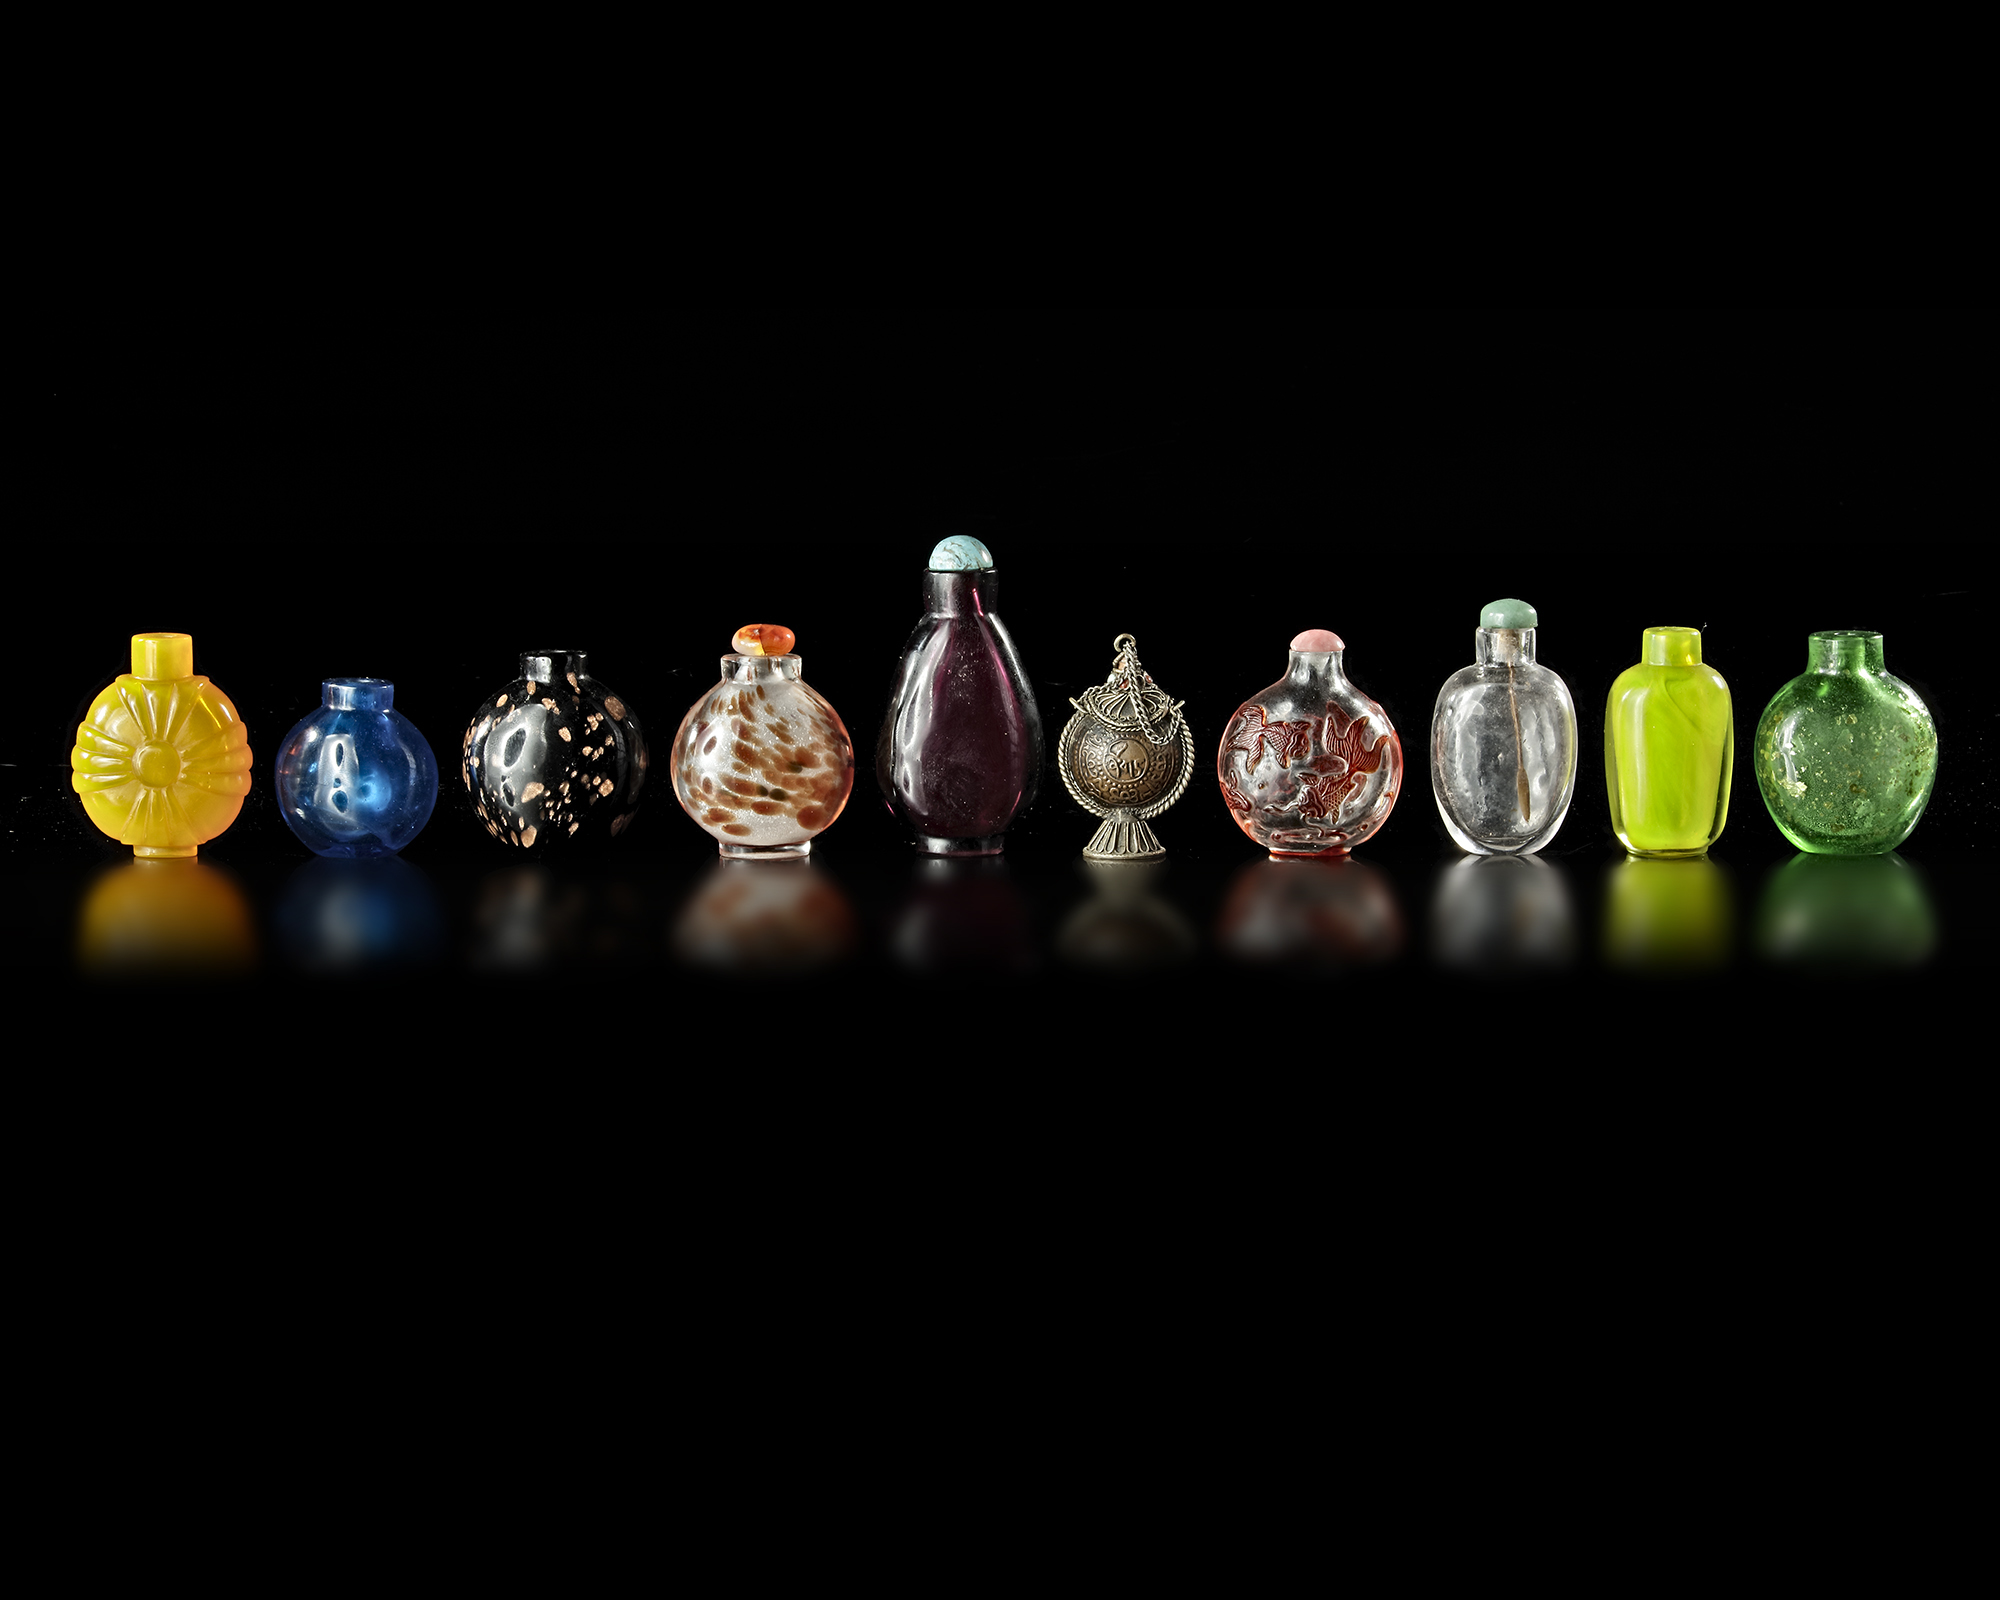 A COLLECTION OF 10 SNUFF BOTTLES IN VARIOUS MATERIALS, QING DYNASTY (1644-1911) - Image 2 of 2